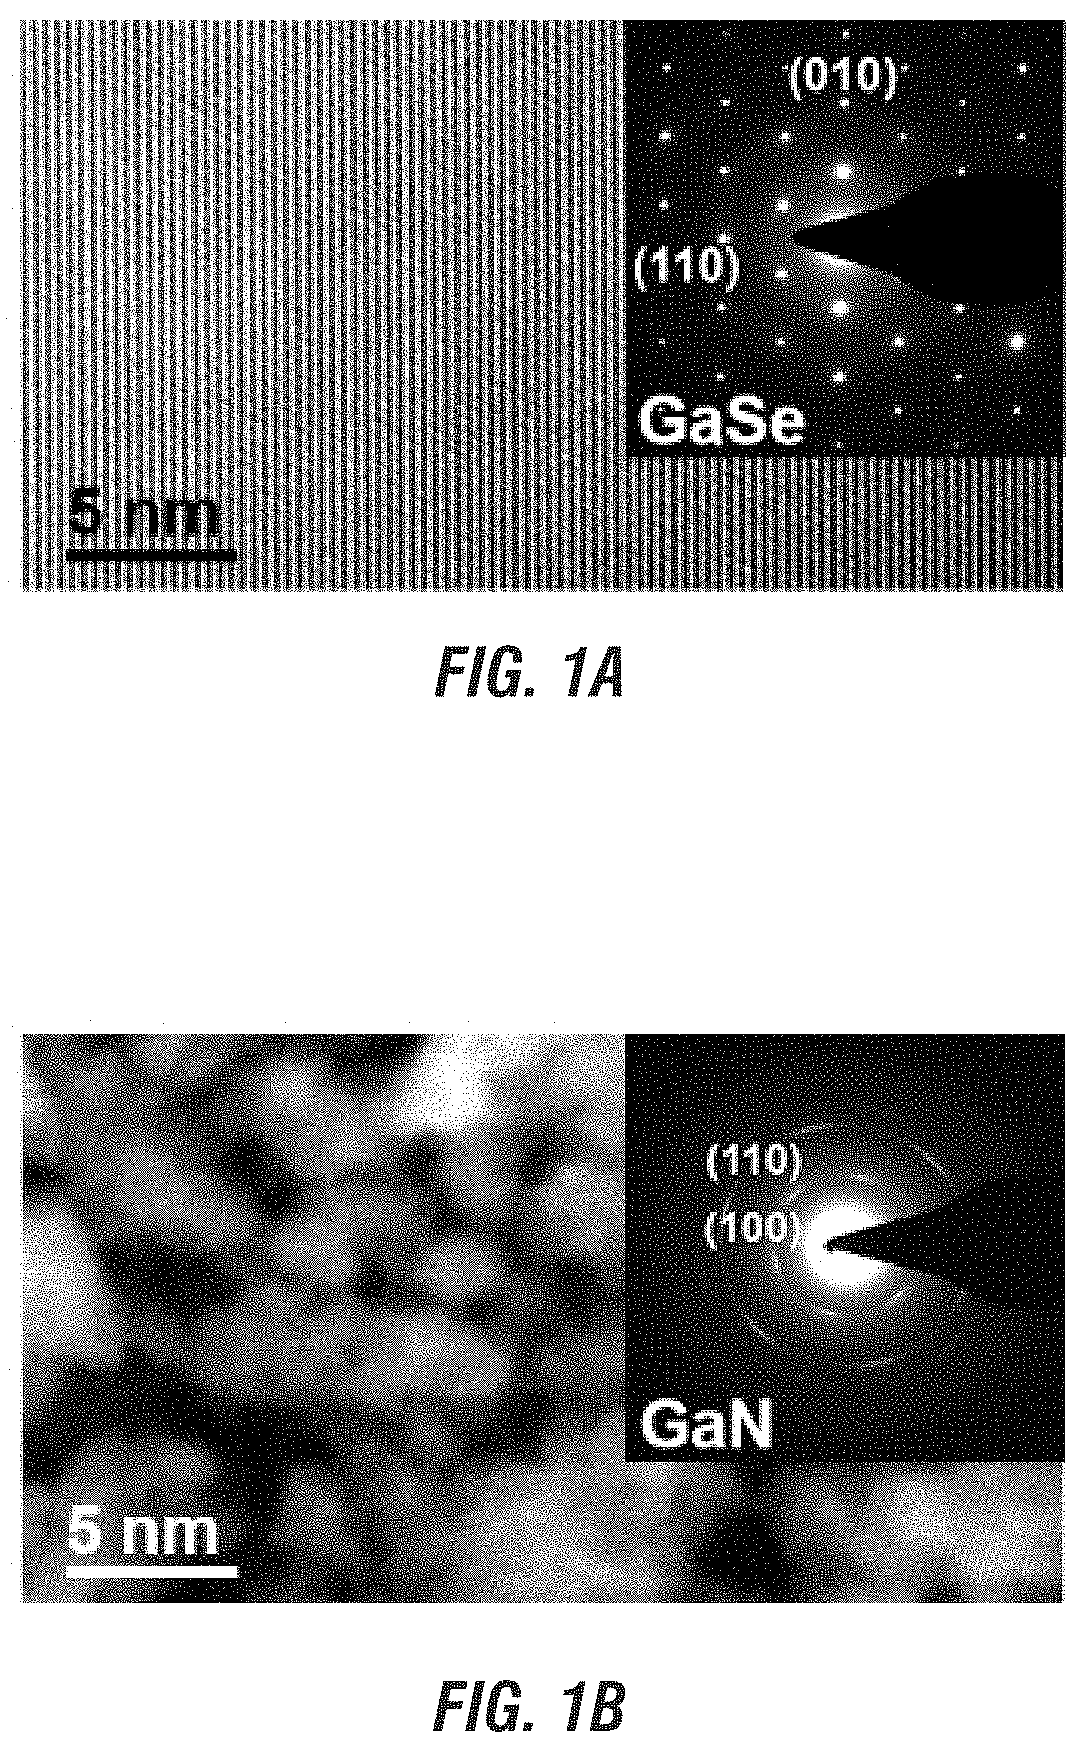 Method of growing crystalline layers on amorphous substrates using two-dimensional and atomic layer seeds